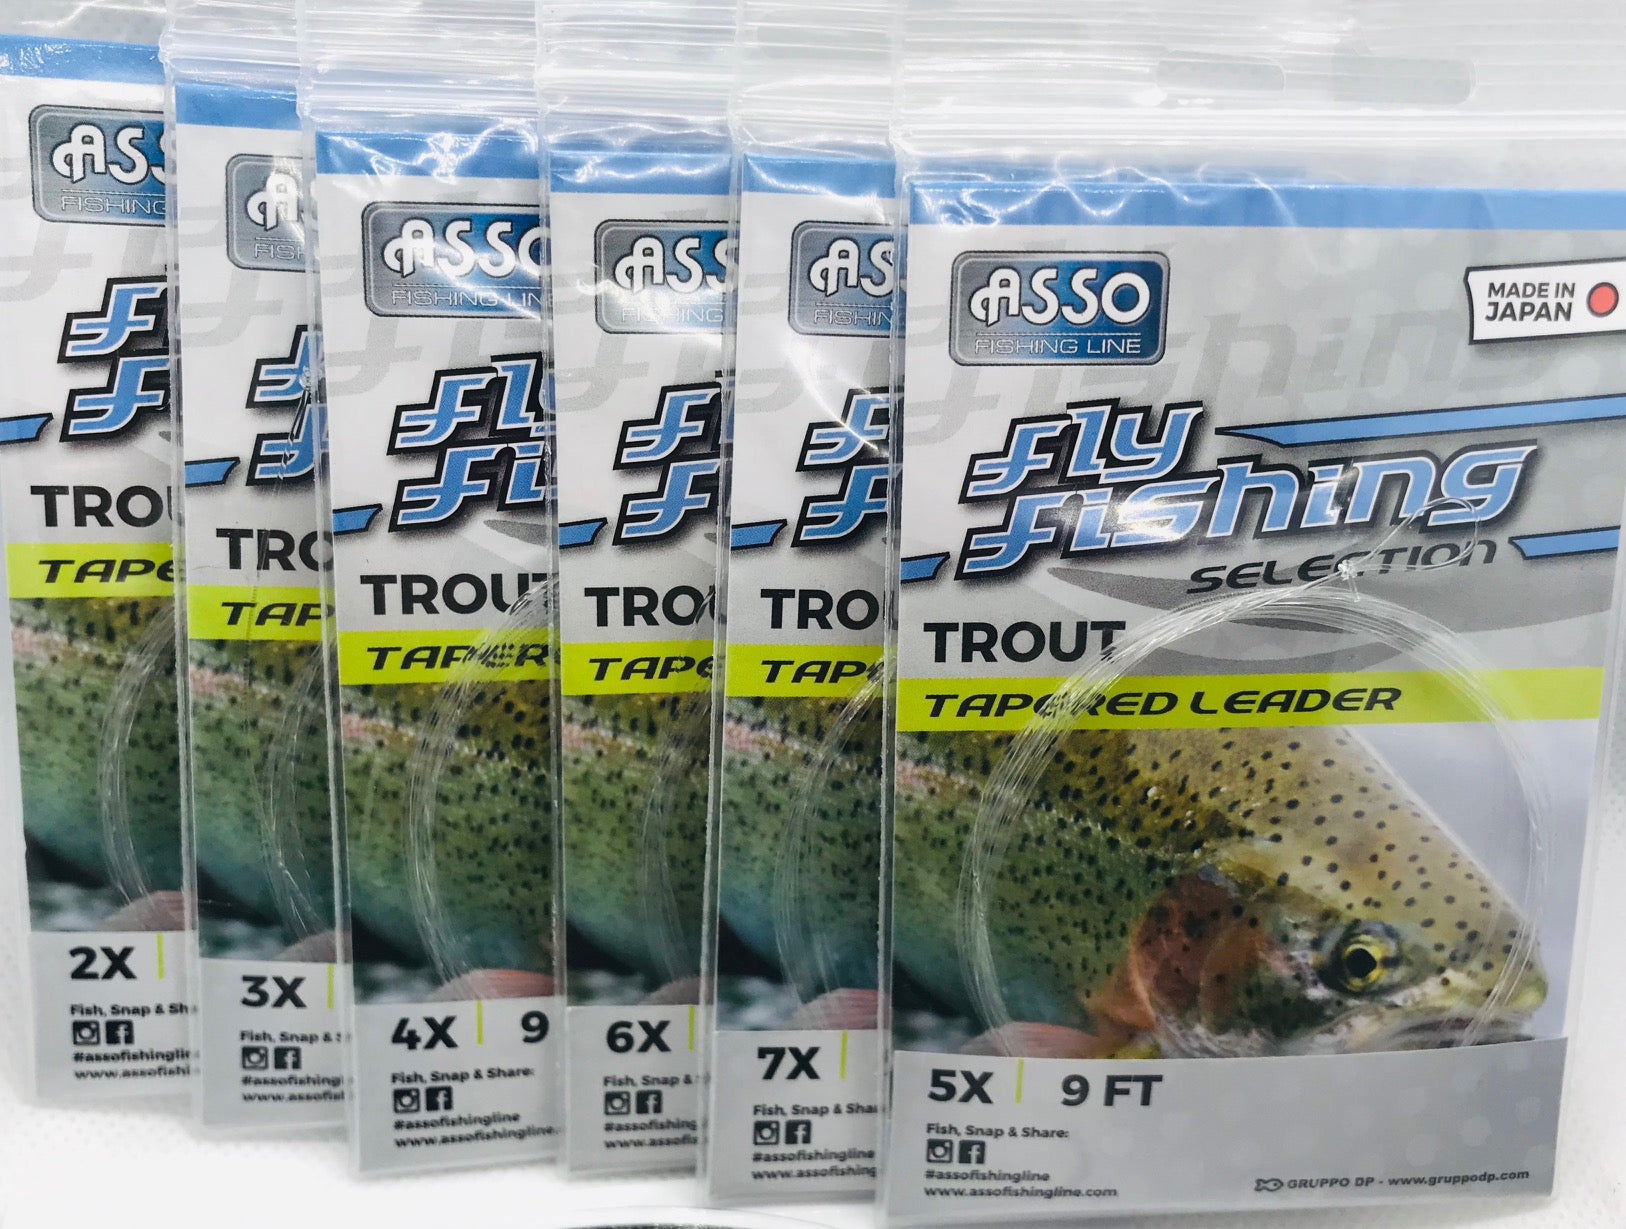 Asso Trout Tapered Leader